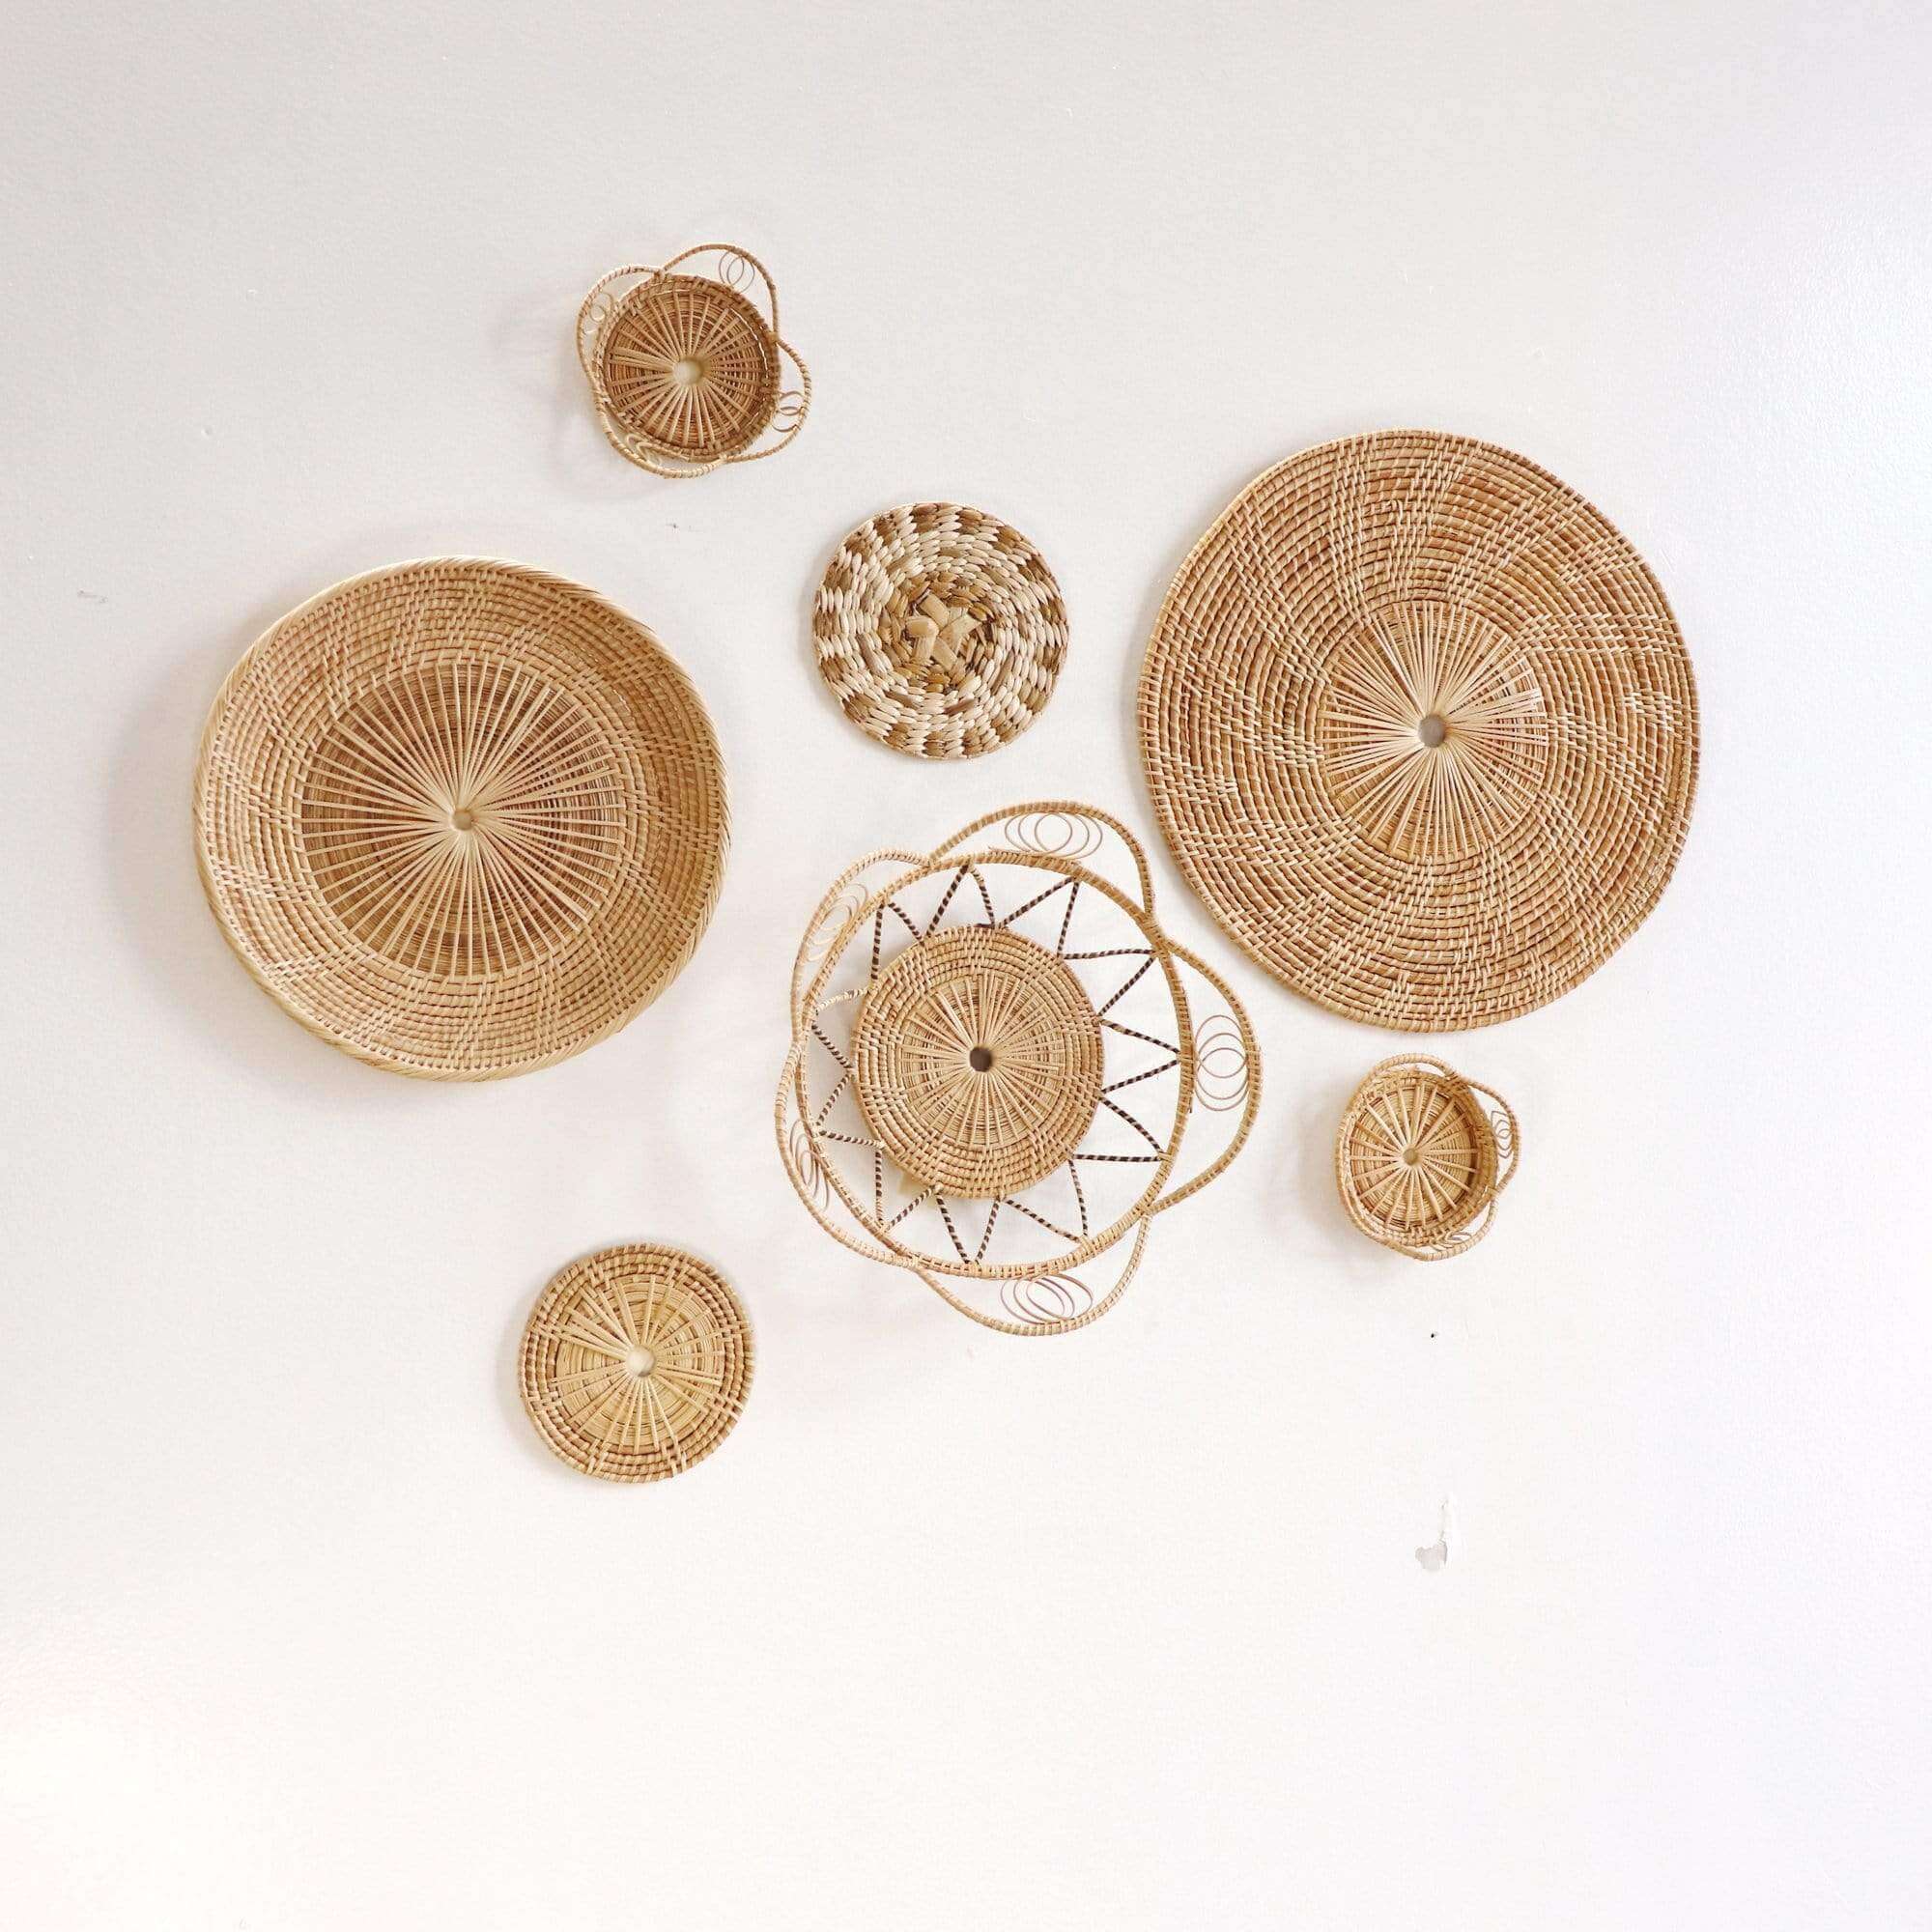 CHA YUN - Rattan Wall Hanging Set, Boho Decor, Handcrafted Home Accents